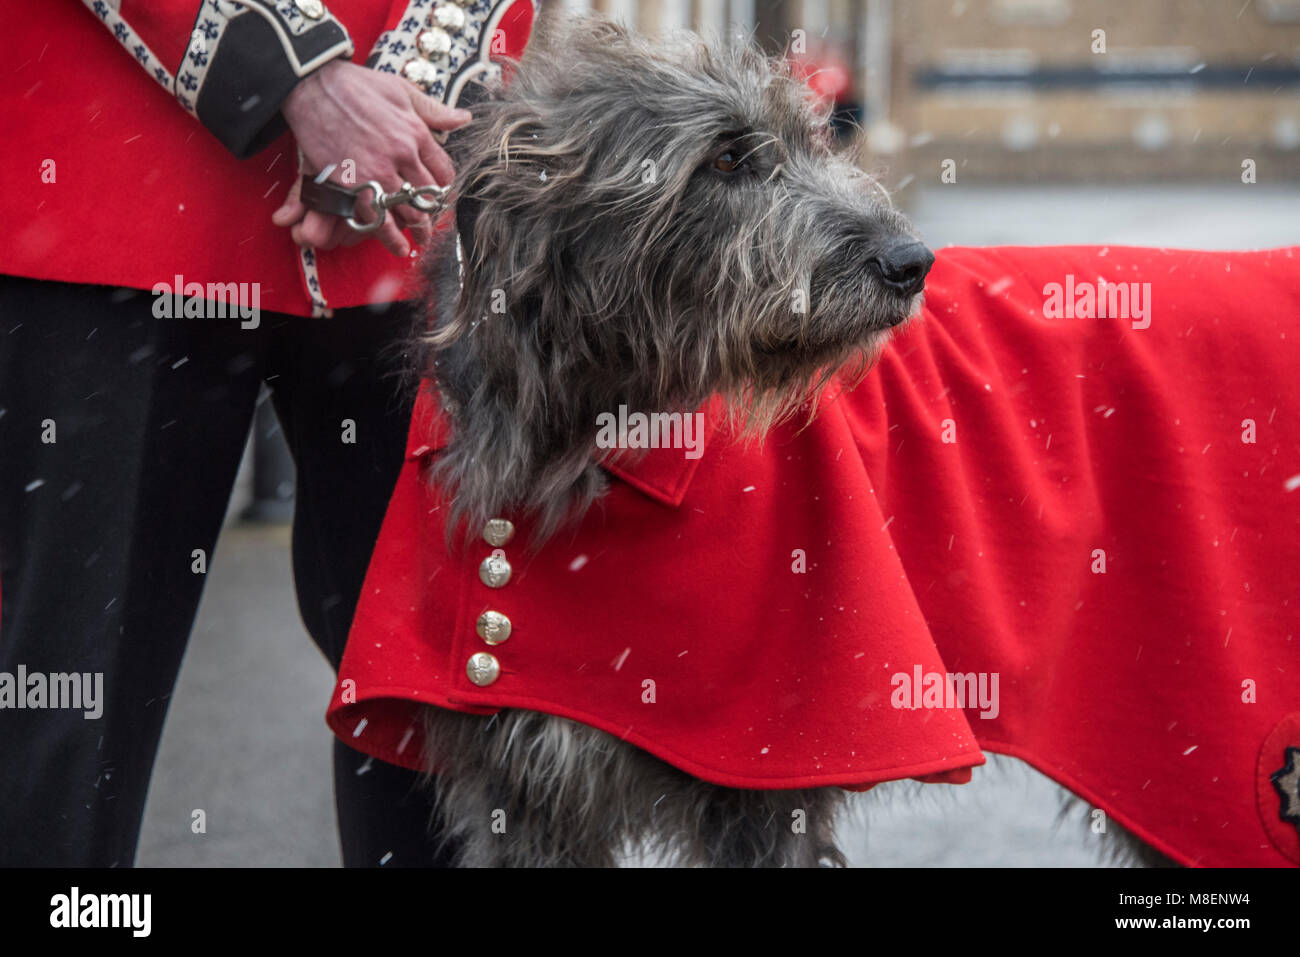 London, UK, 17 Mar 2018. Their mascot, the Irish Wolfhound Domhnal waits in light snow -  - The Duke of Cambridge, Colonel of the Irish Guards, accompanied by The Duchess of Cambridge, visited the 1st Battalion Irish Guards at their St. Patrick's Day Parade. 350 soldiers marched onto the Parade Square at Cavalry Barracks led by their mascot, the Irish Wolfhound Domhnall. Stock Photo